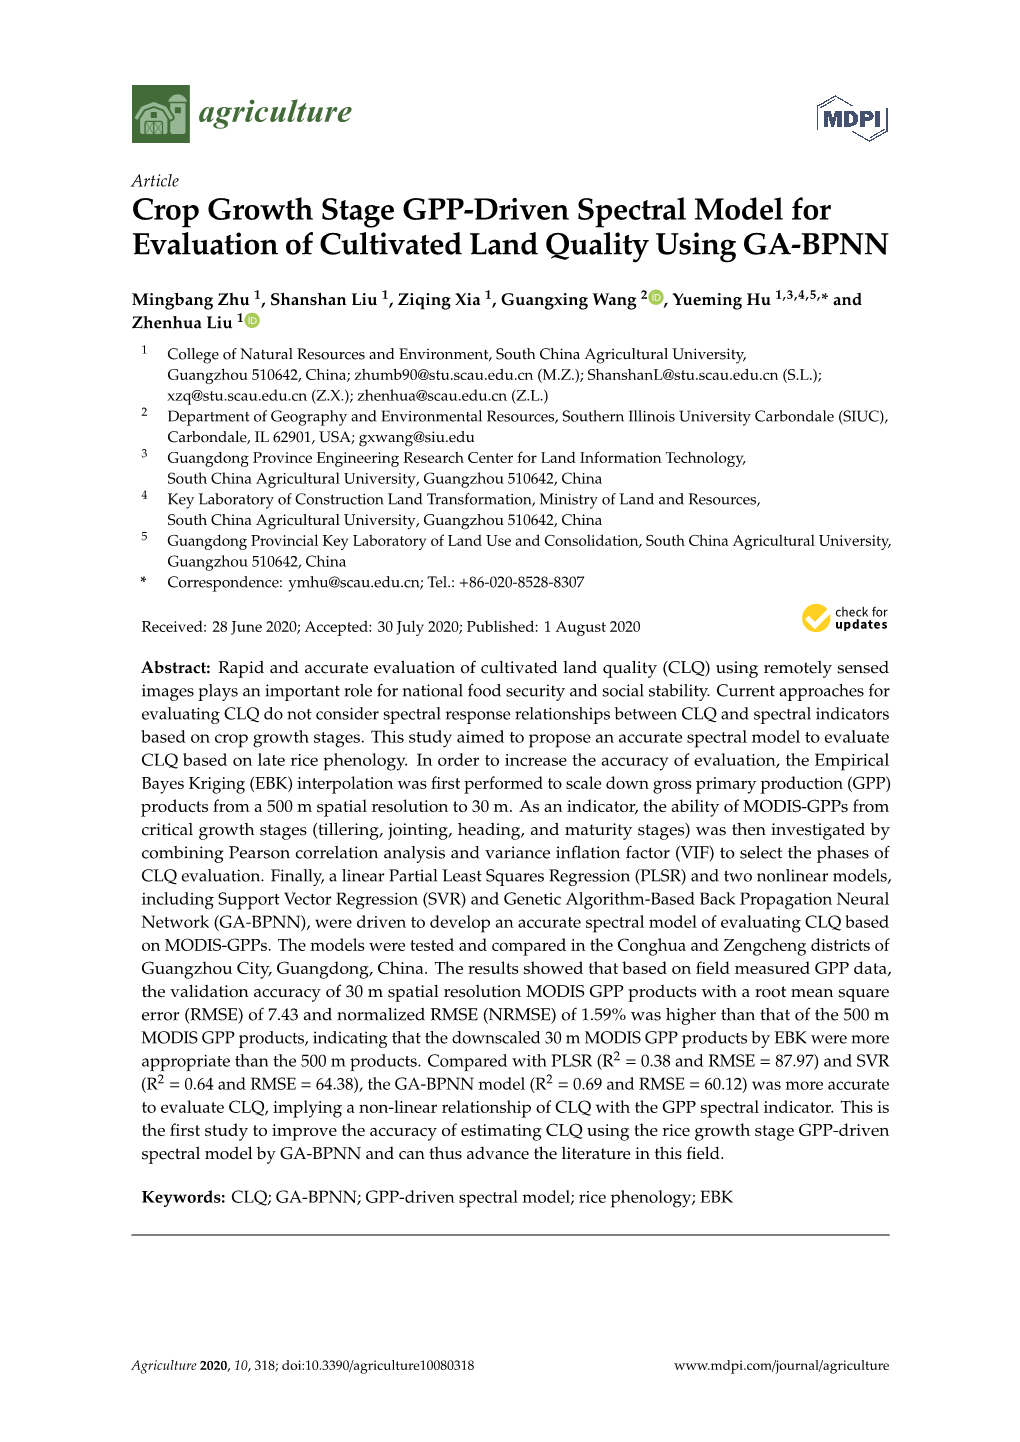 Crop Growth Stage GPP-Driven Spectral Model for Evaluation of Cultivated Land Quality Using GA-BPNN